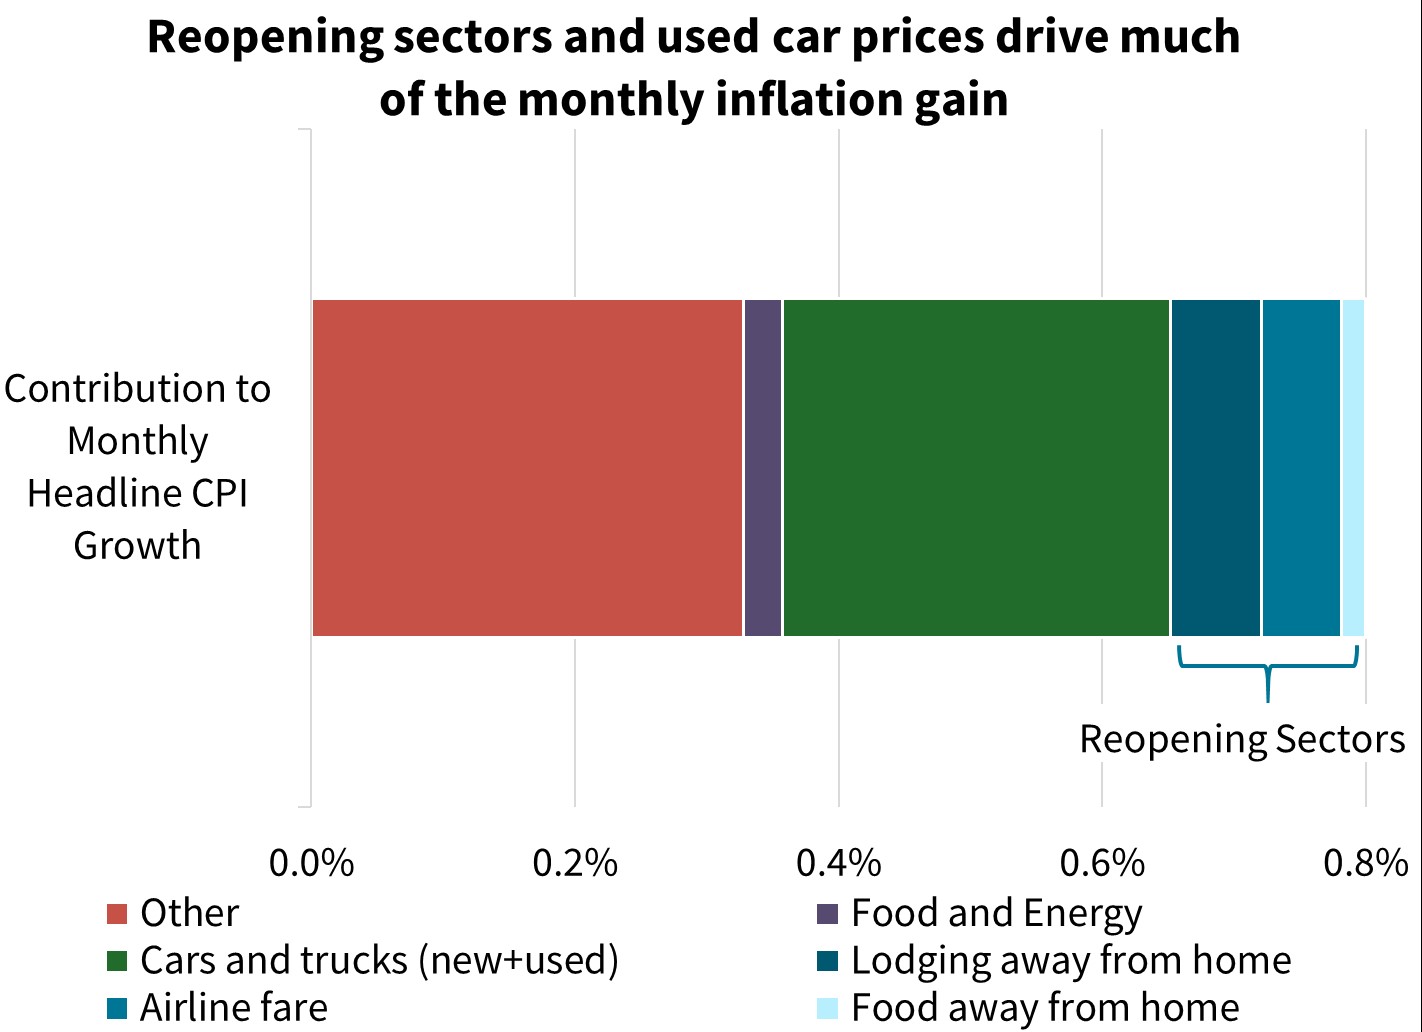  Reopening sectors and used car prices drive much of the monthly inflation gain